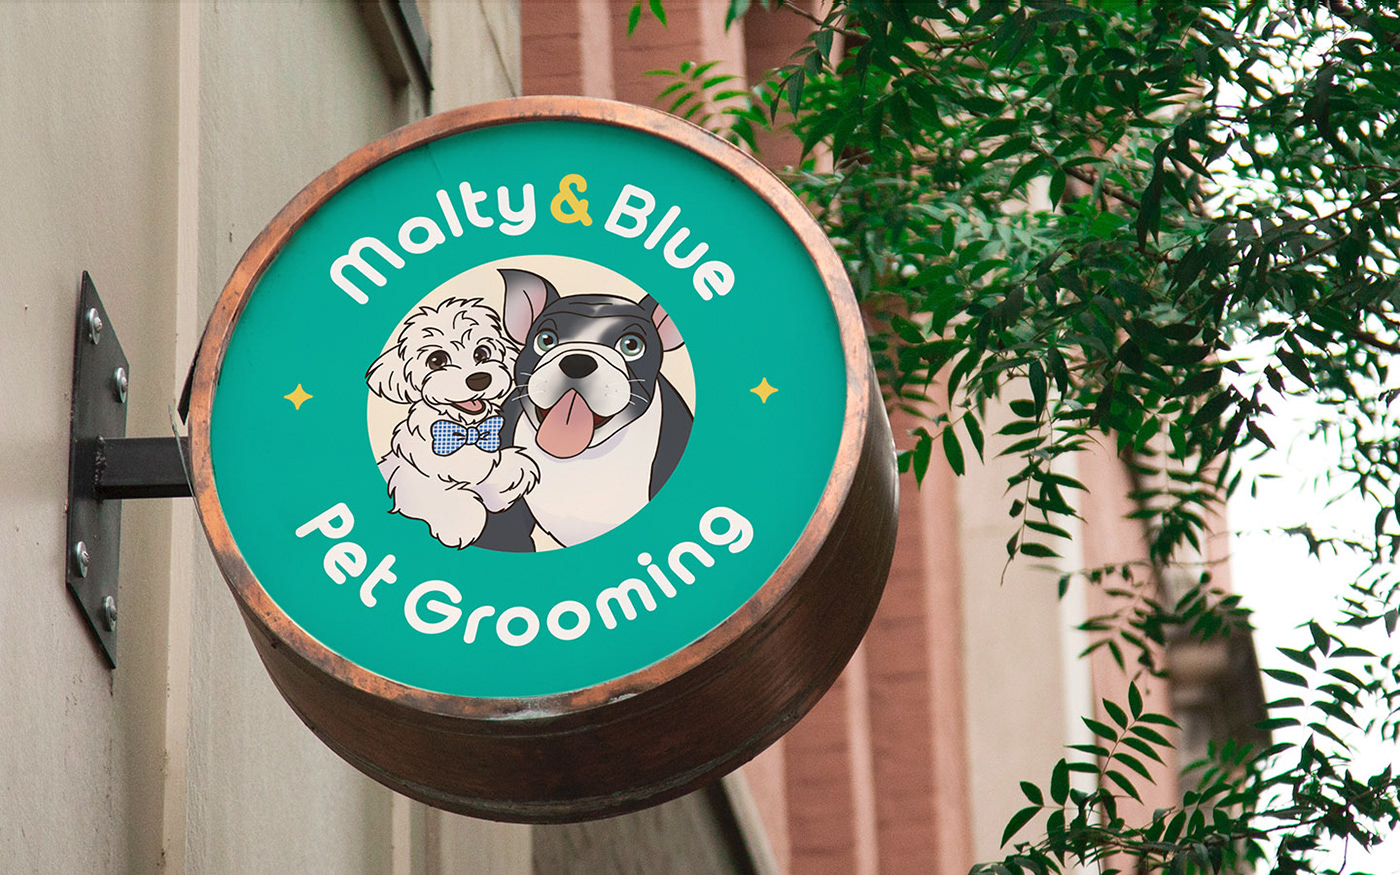 Signage for Malty & Blue, a pet company